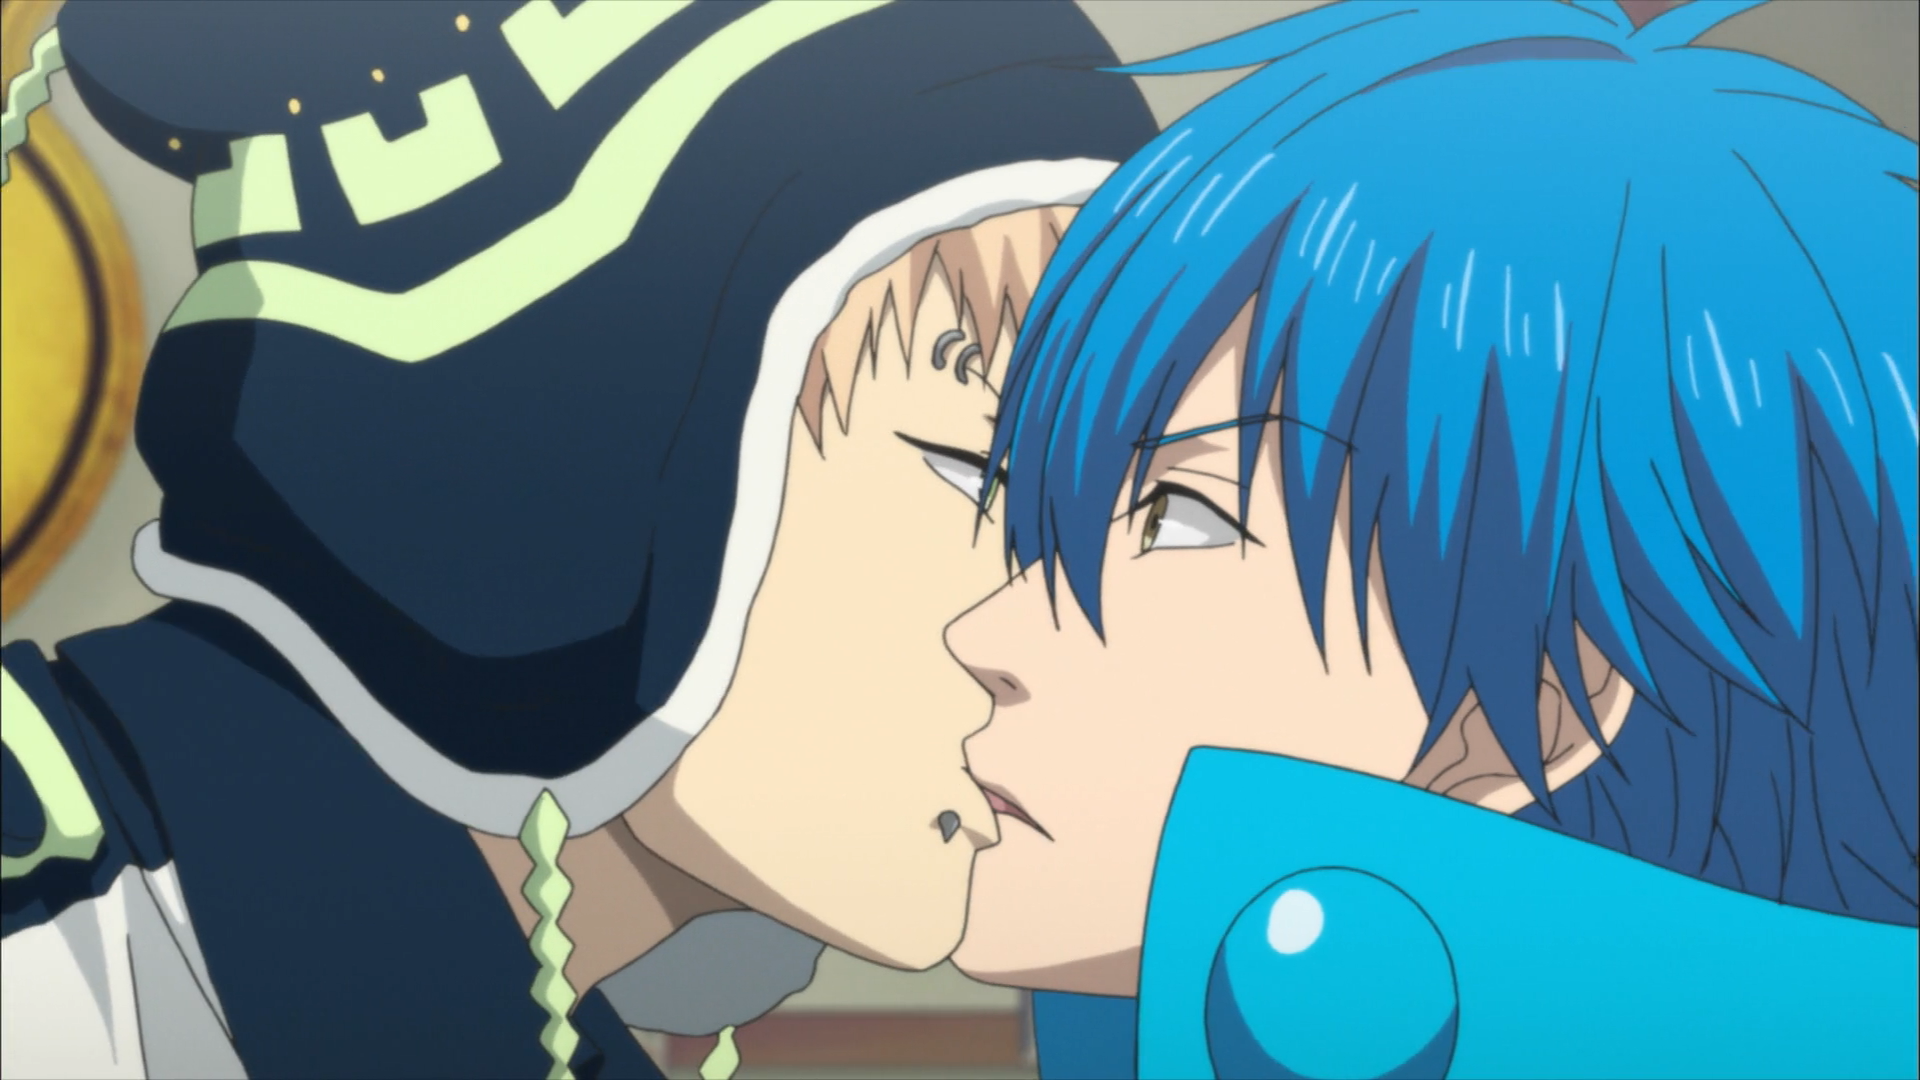 If you ever wanted BL anime without any of the BL, “DRAMAtical